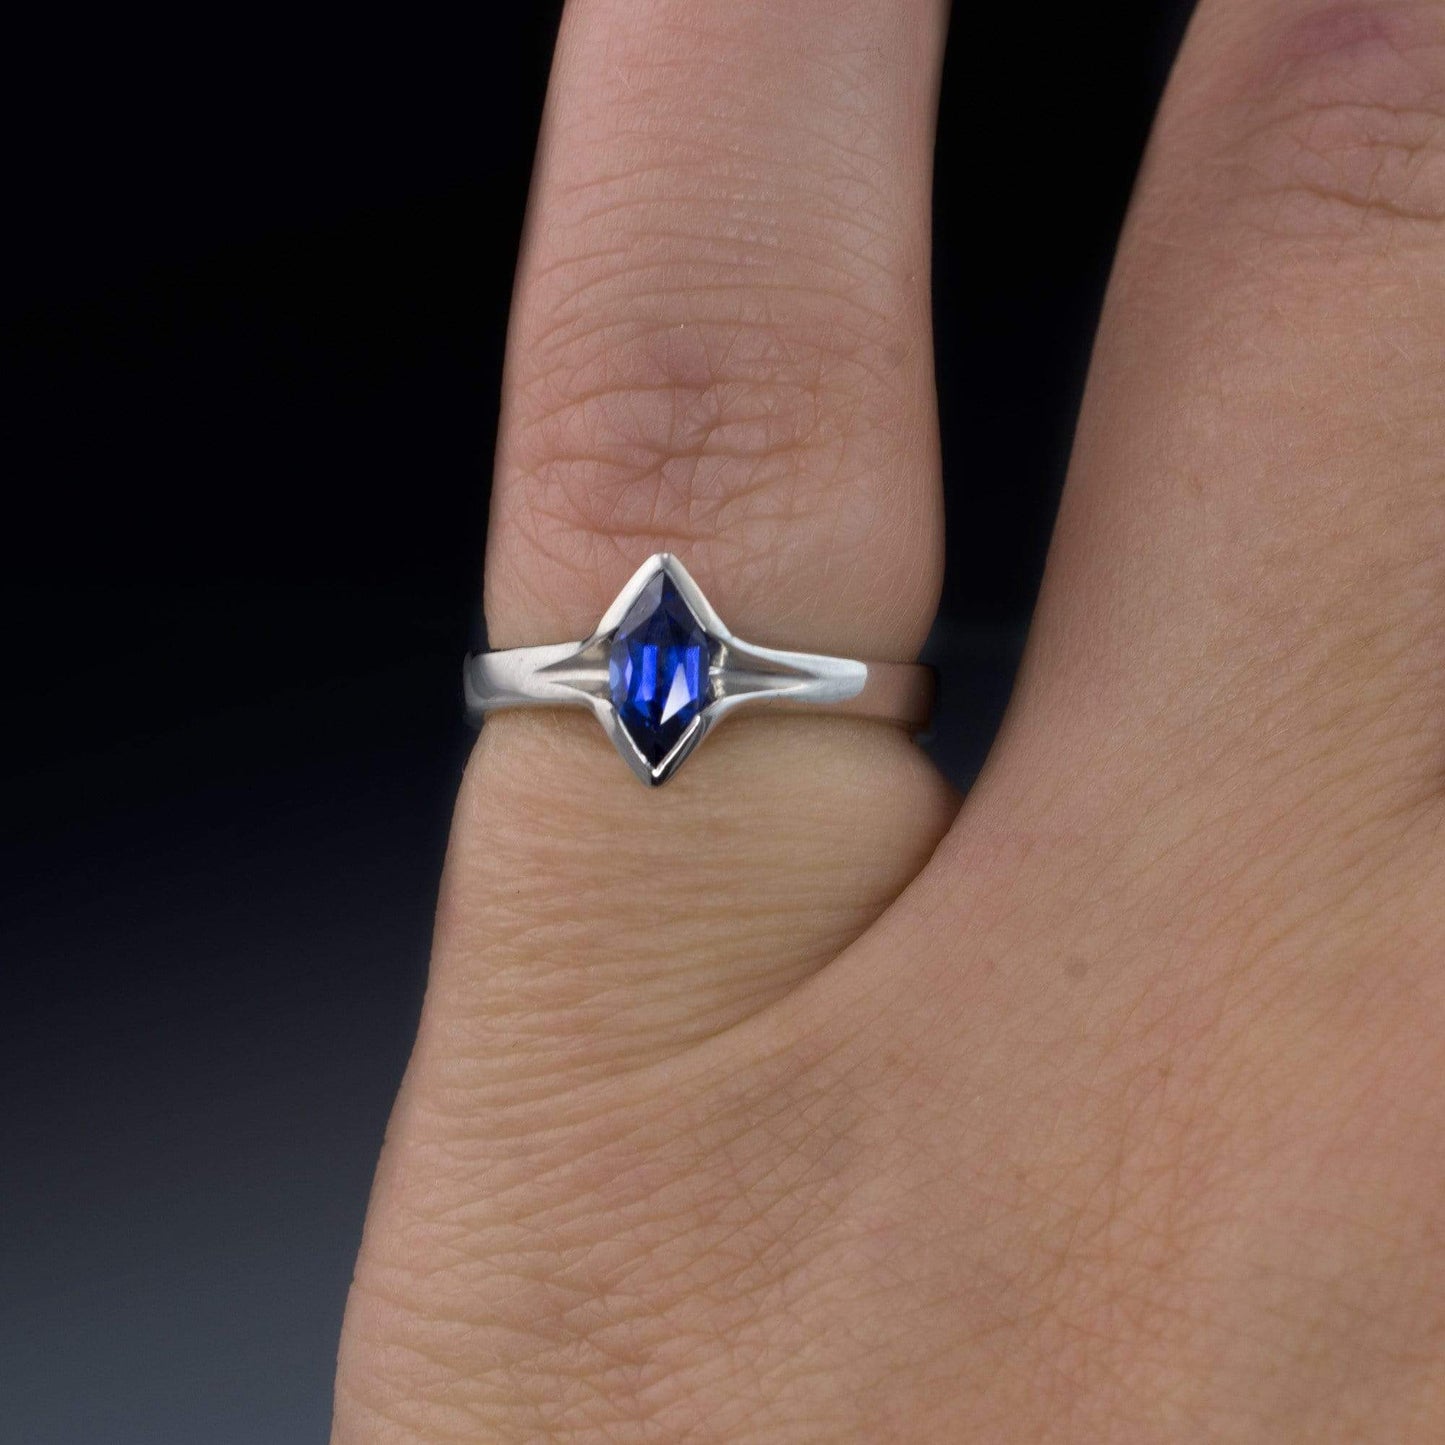 Chatham Marquise Blue Sapphire Semi-Bezel Solitaire Engagement Ring Ring by Nodeform